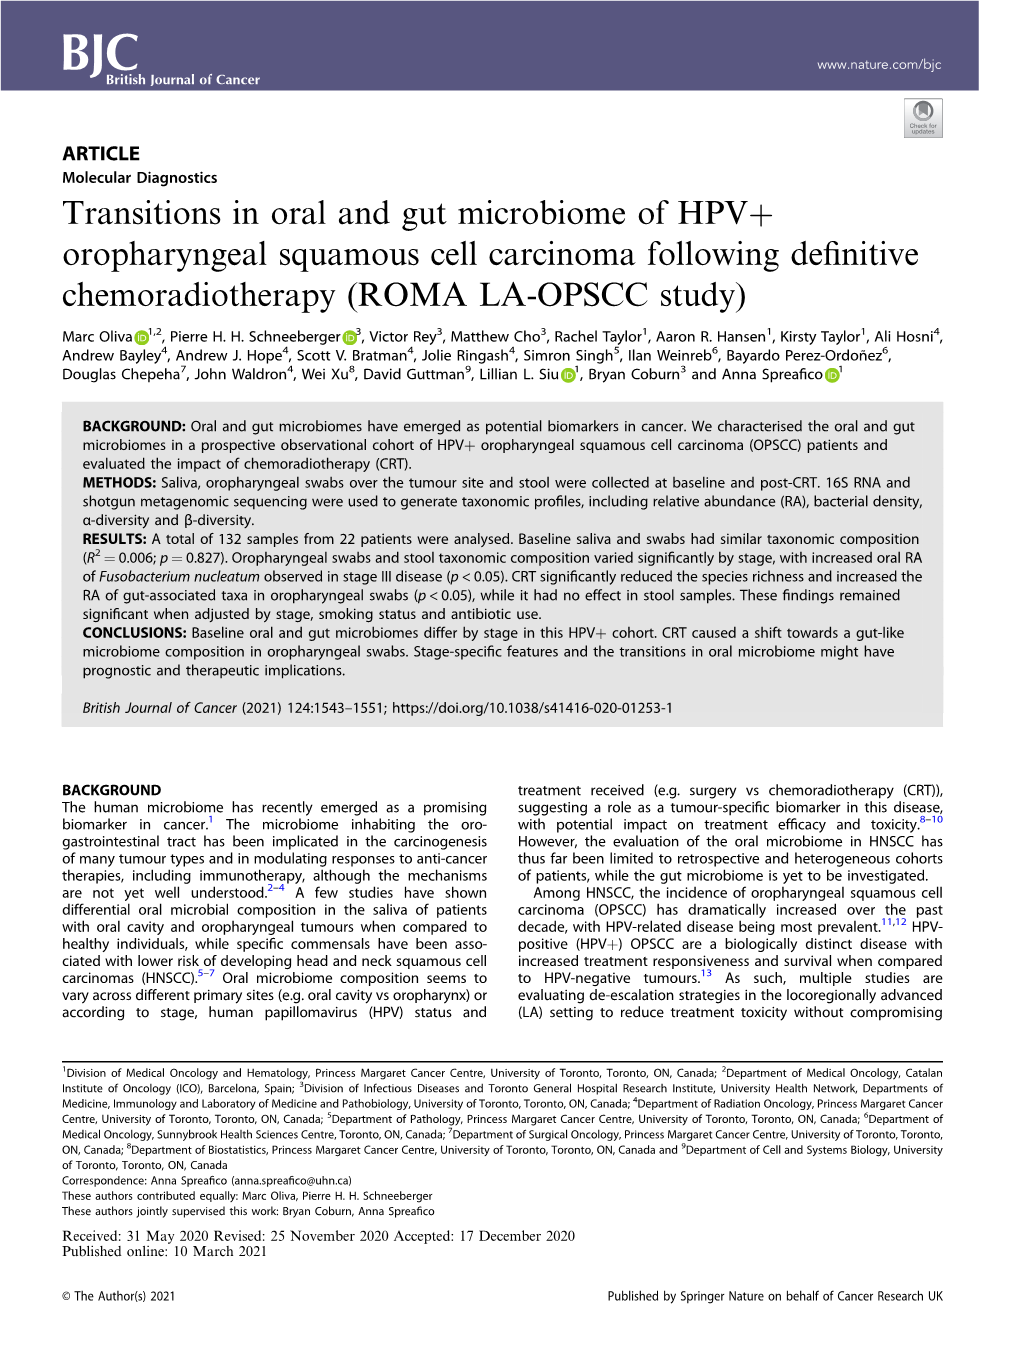 Transitions in Oral and Gut Microbiome of HPV+ Oropharyngeal Squamous Cell Carcinoma Following Deﬁnitive Chemoradiotherapy (ROMA LA-OPSCC Study)